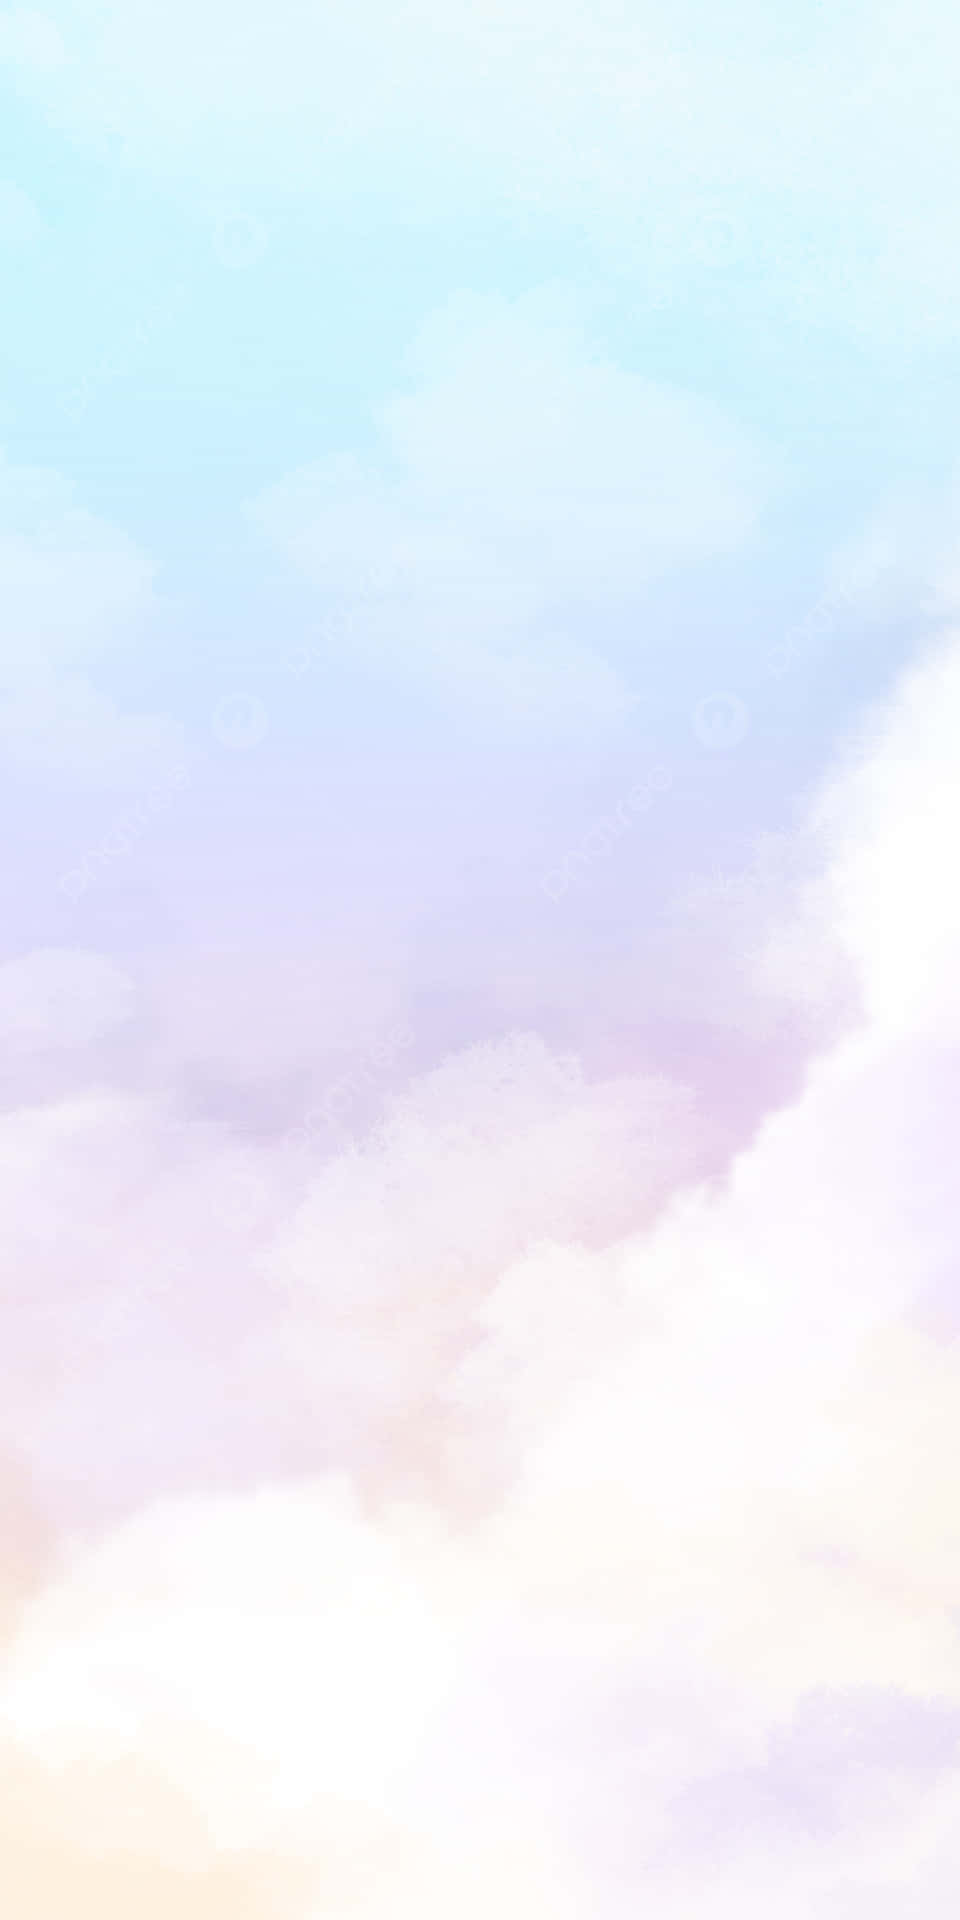 A Watercolor Background With Clouds